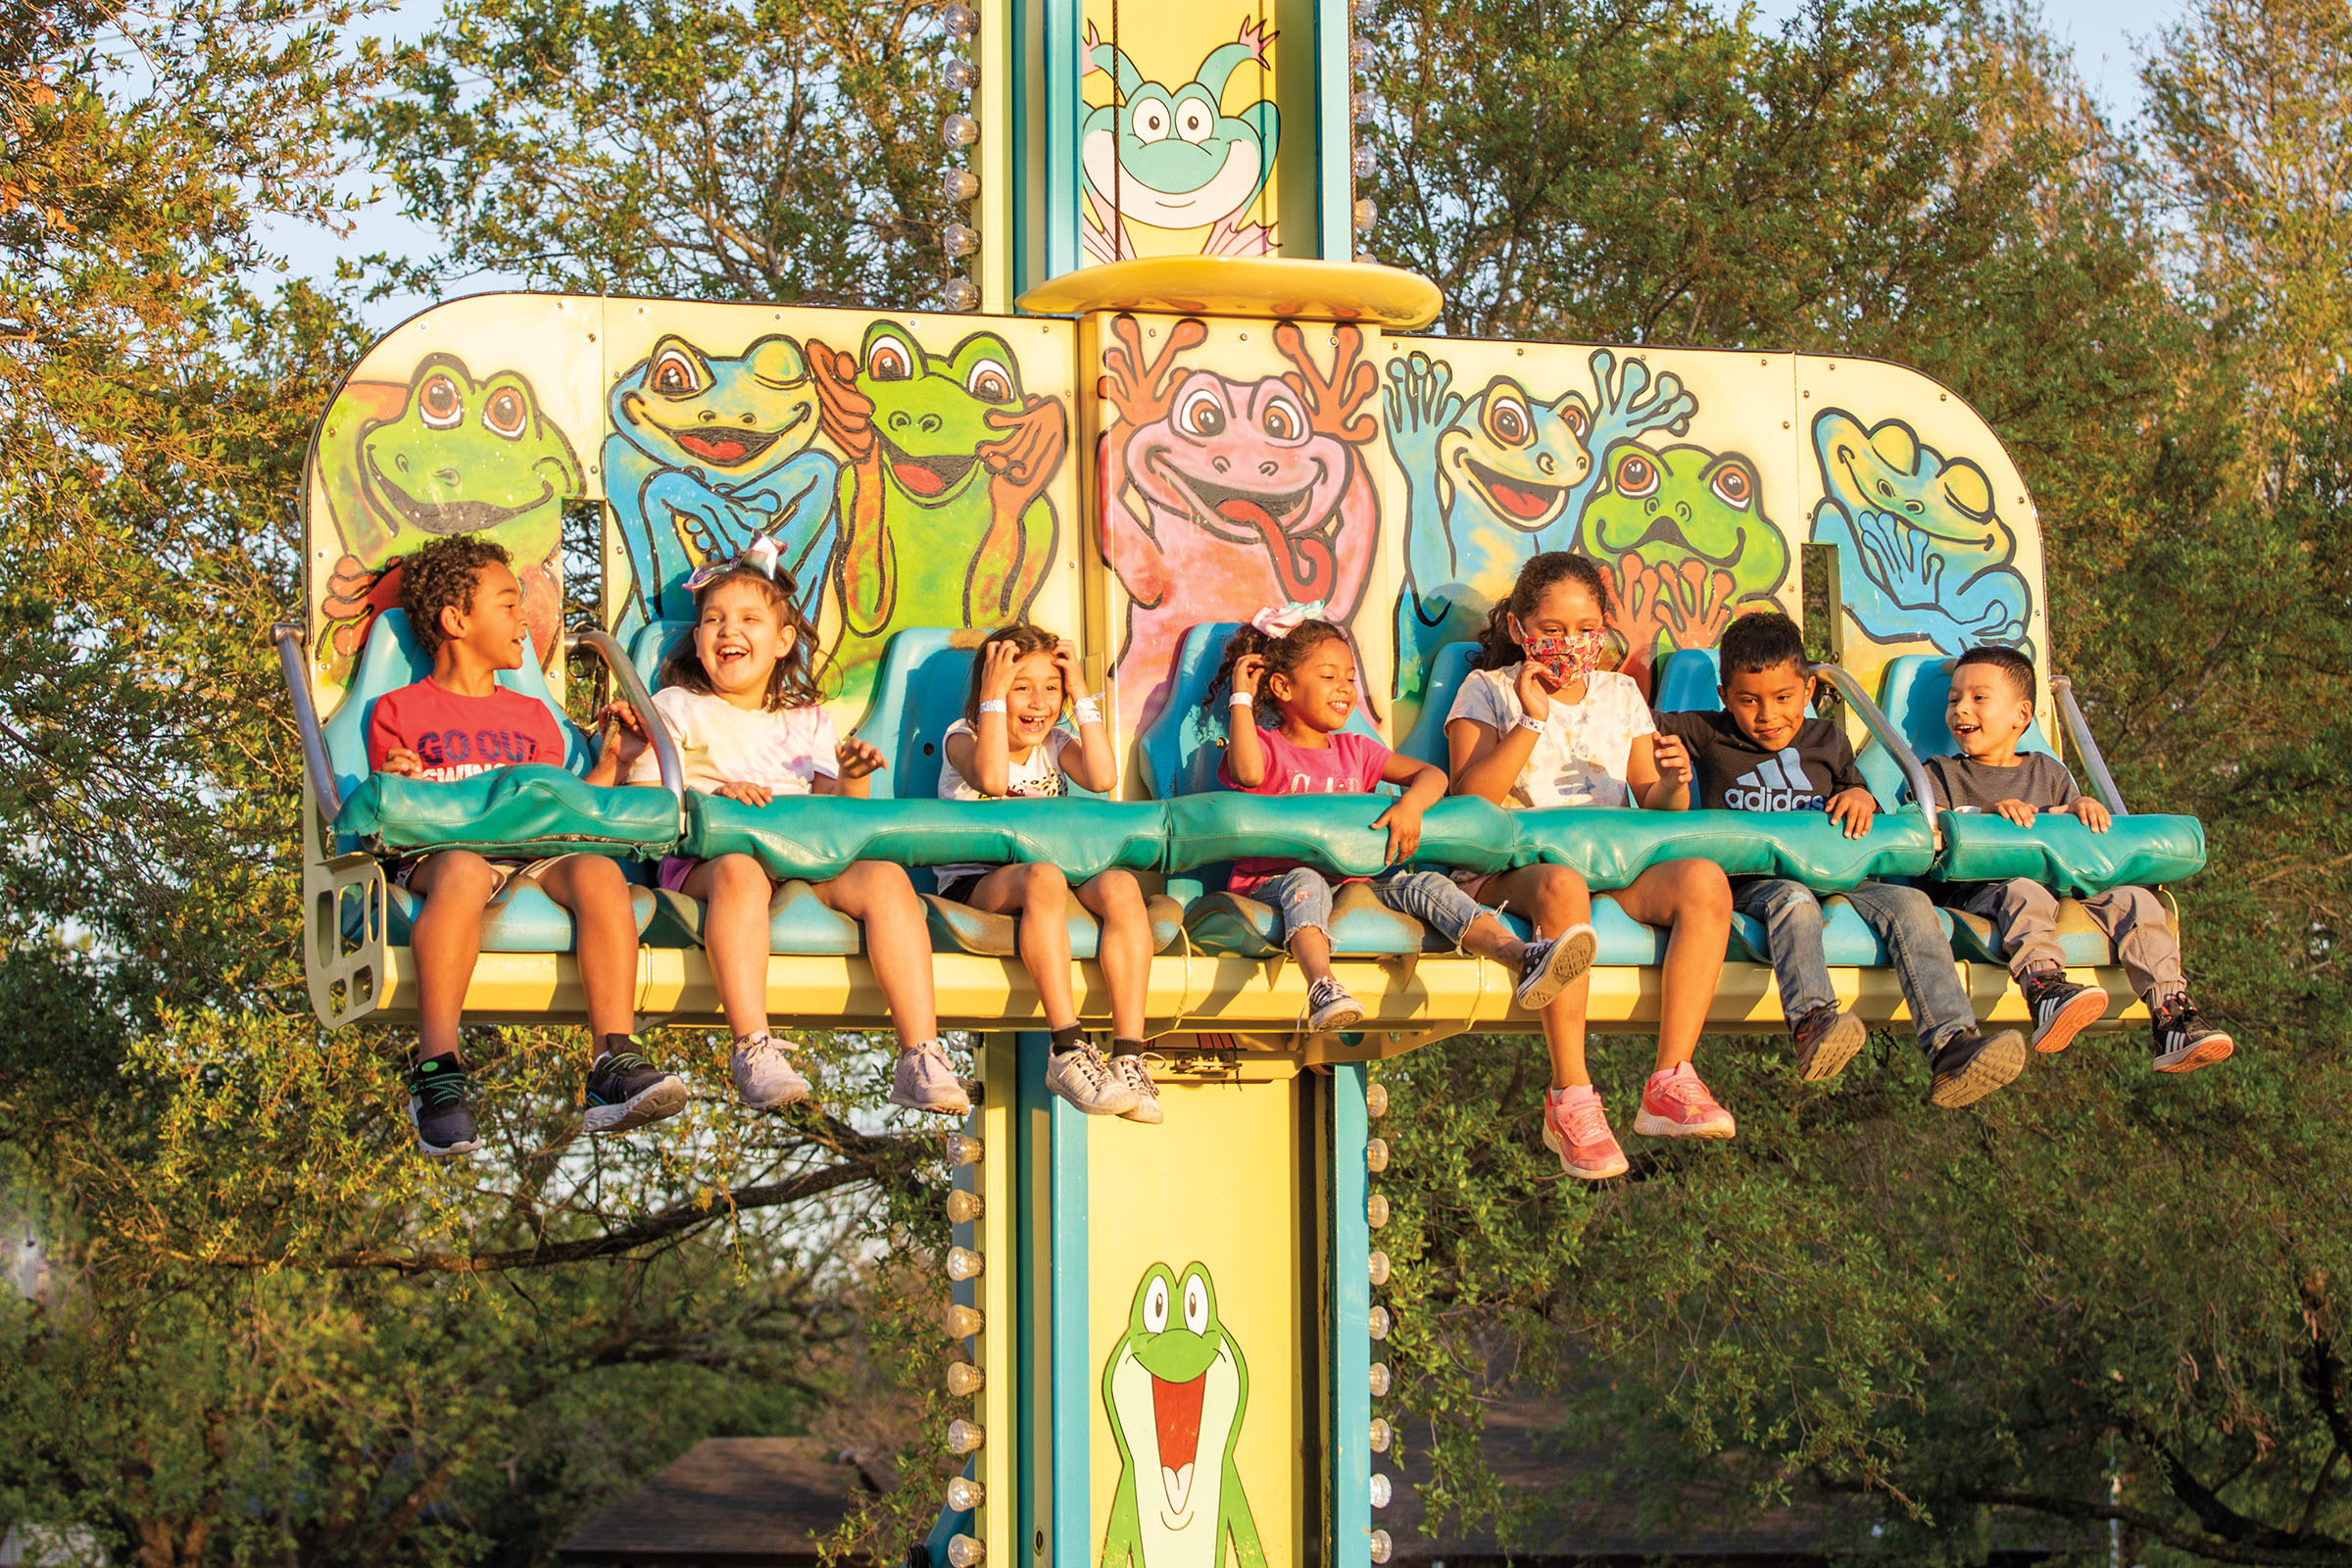 A group of people on a frog-themed ride